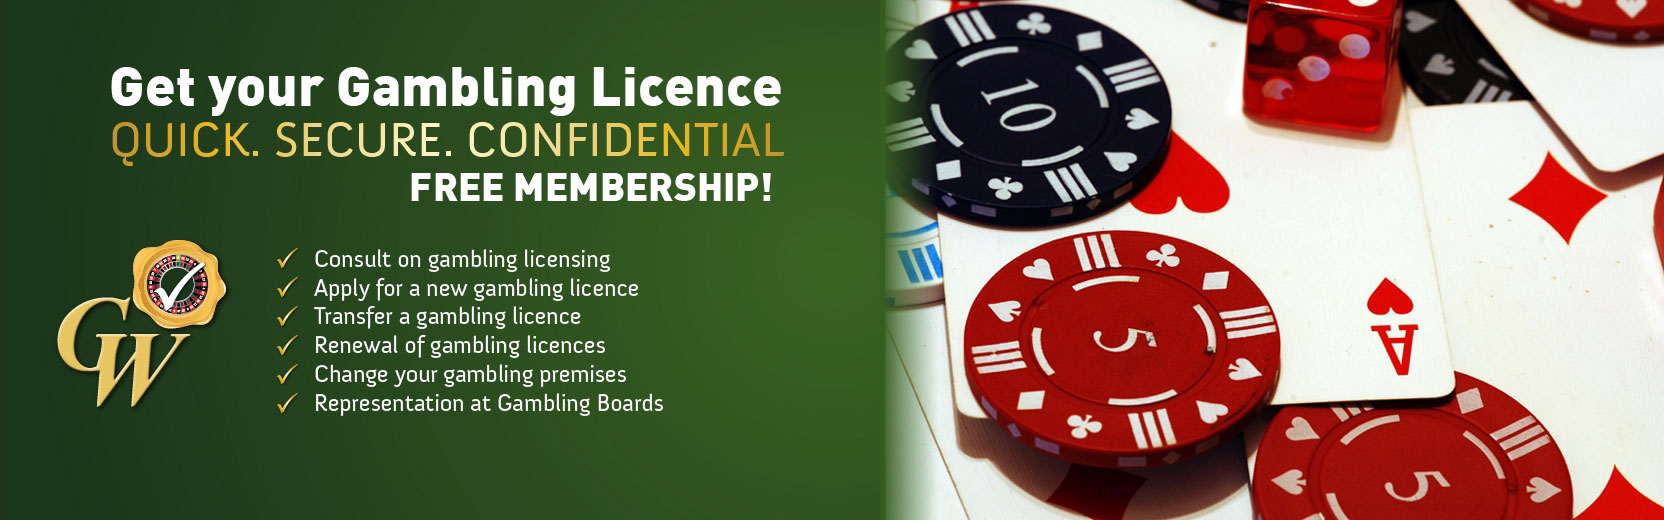 Get Your Gambling Licence